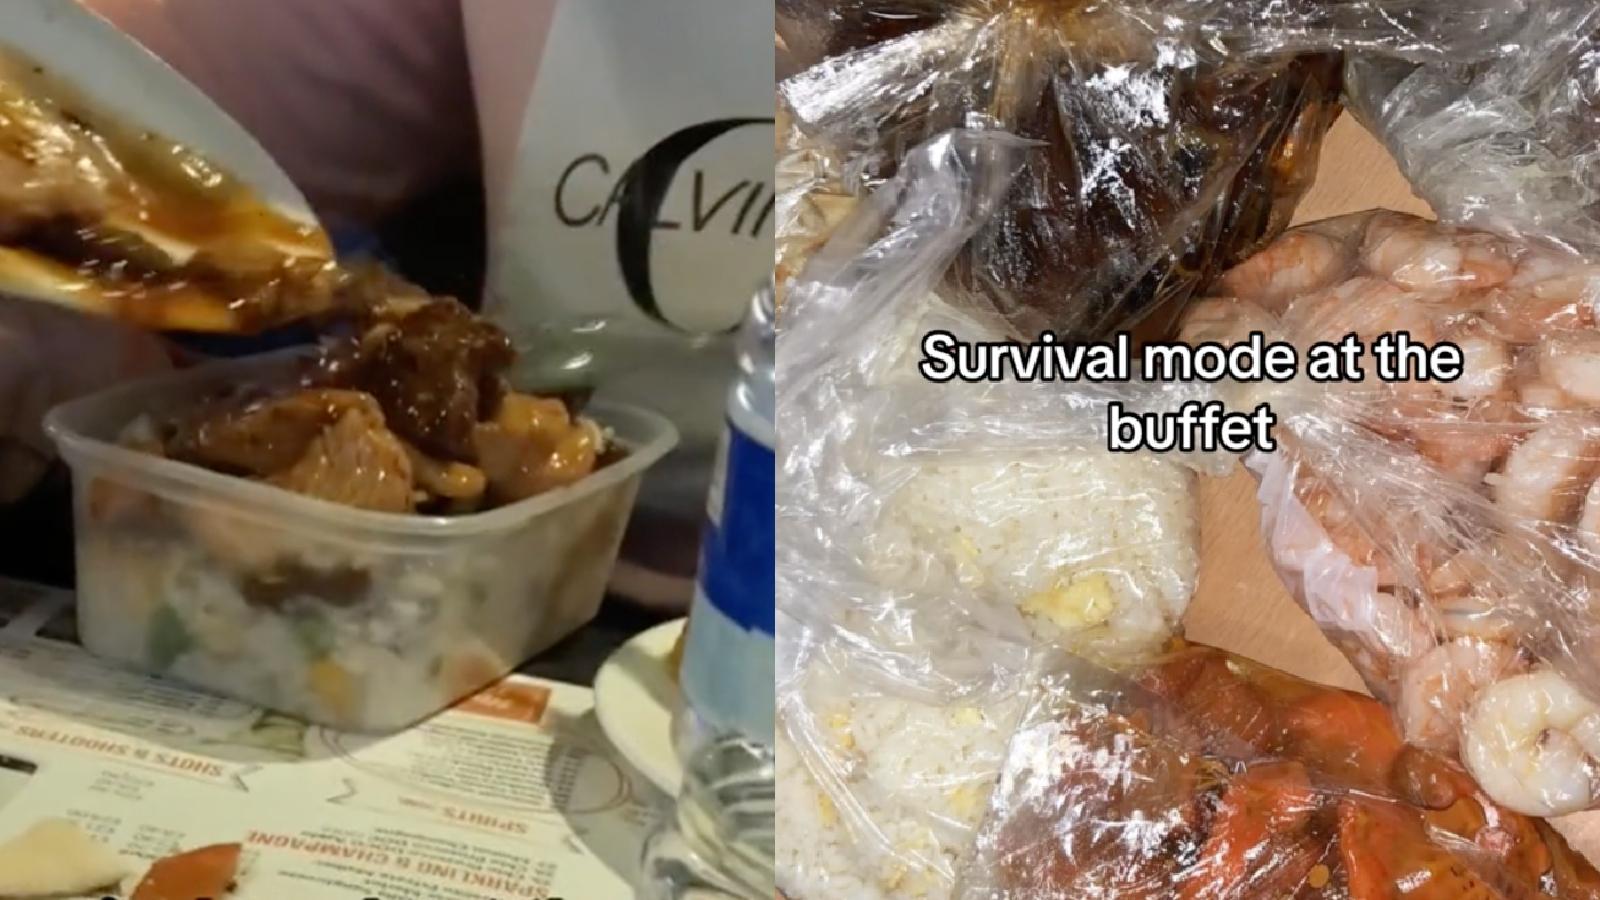 Man takes leftovers from buffet TikTok